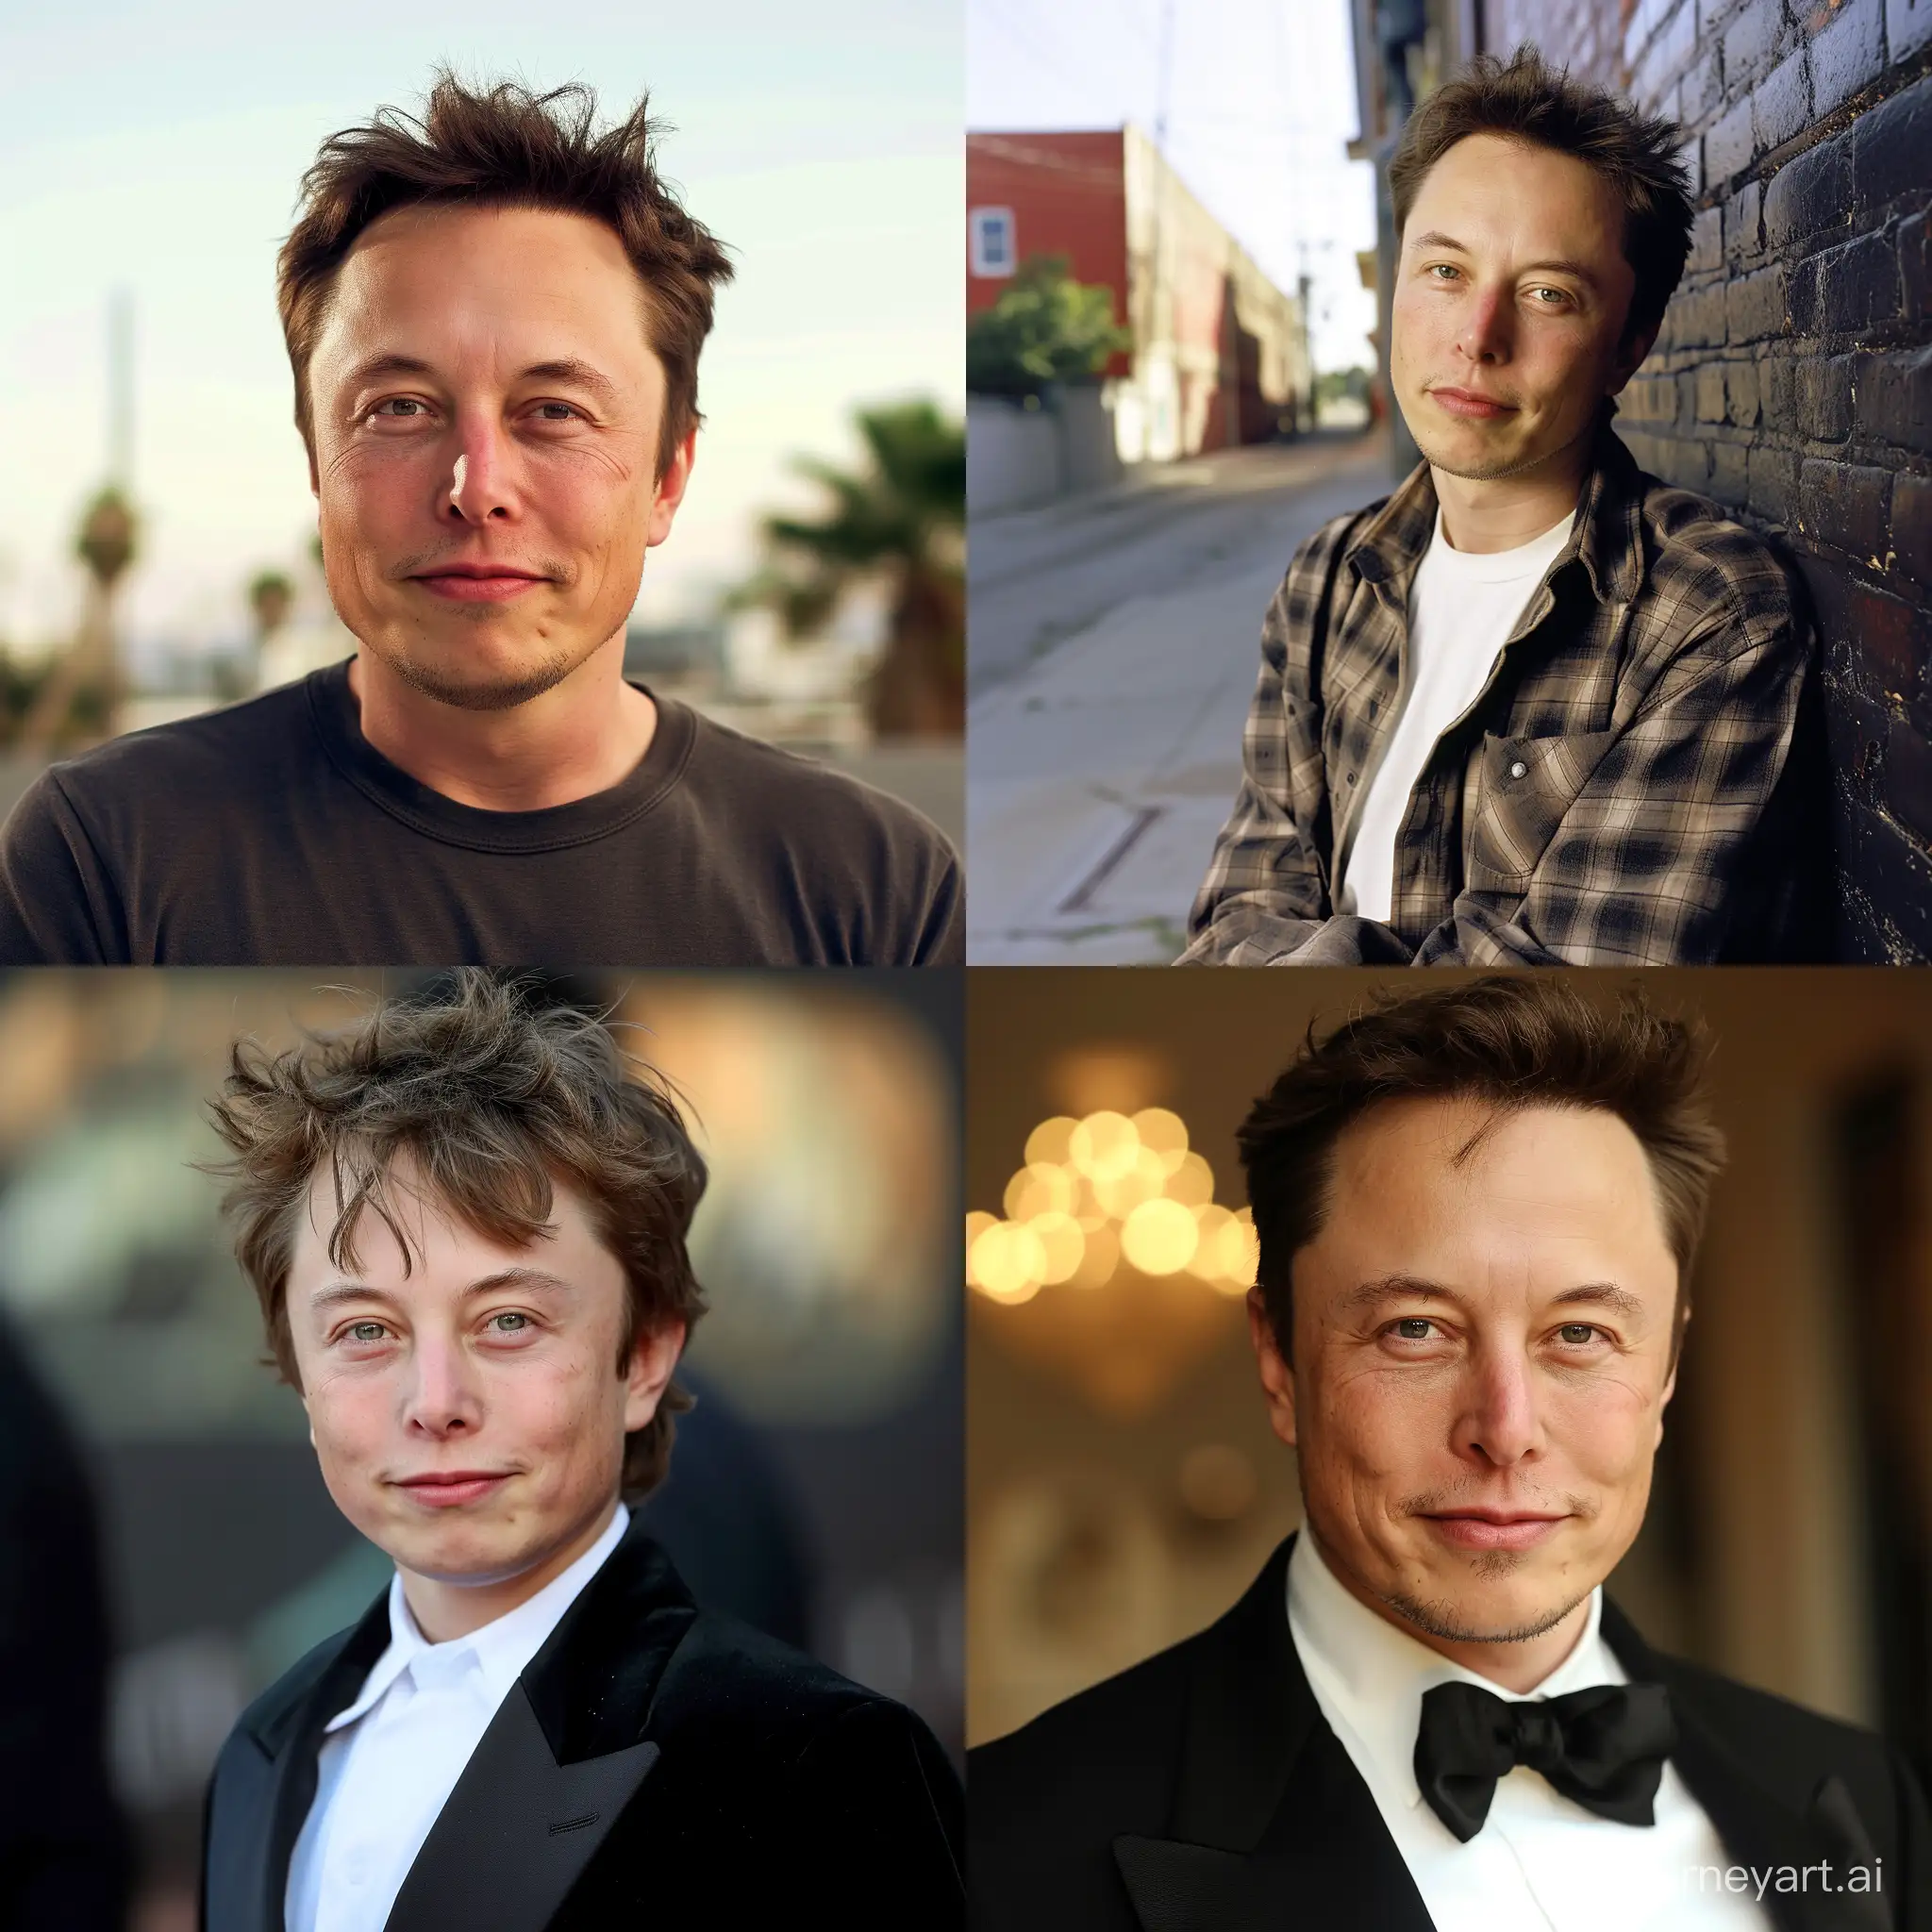 Young-Elon-Musk-Portrait-with-Vintage-Aesthetic